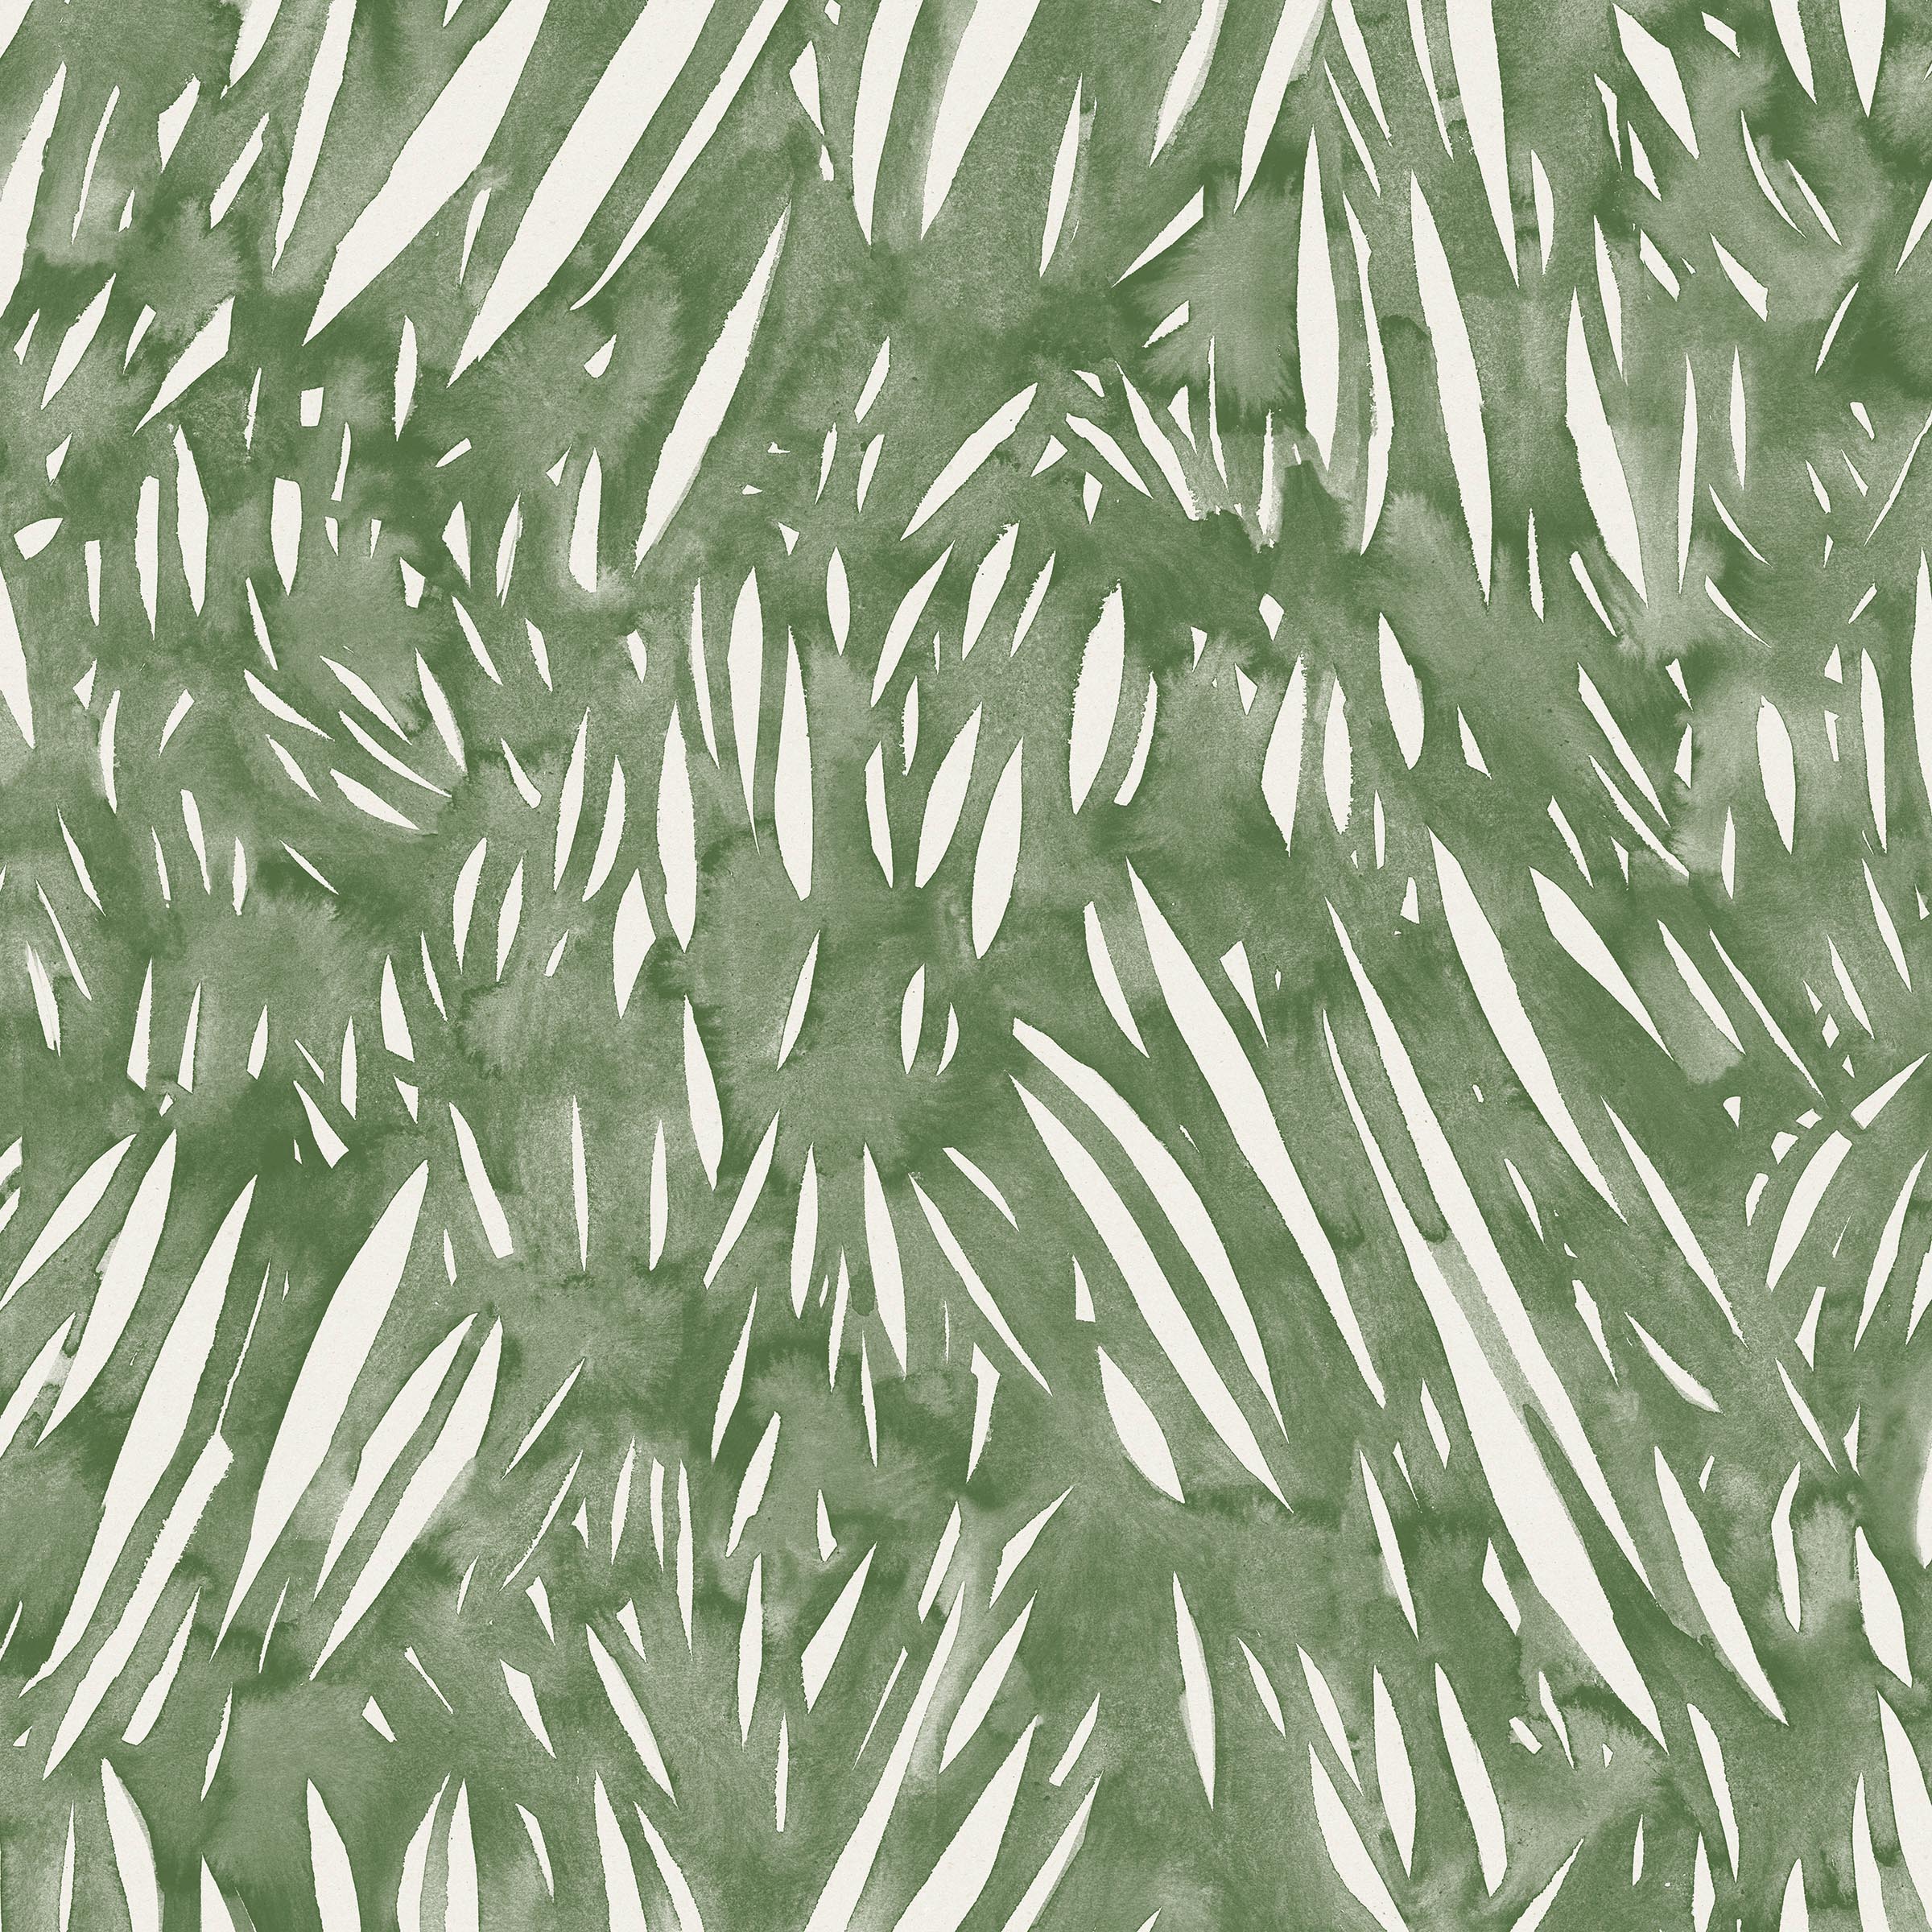 Detail of wallpaper in an abstract leaf pattern in white on a sage watercolor field.